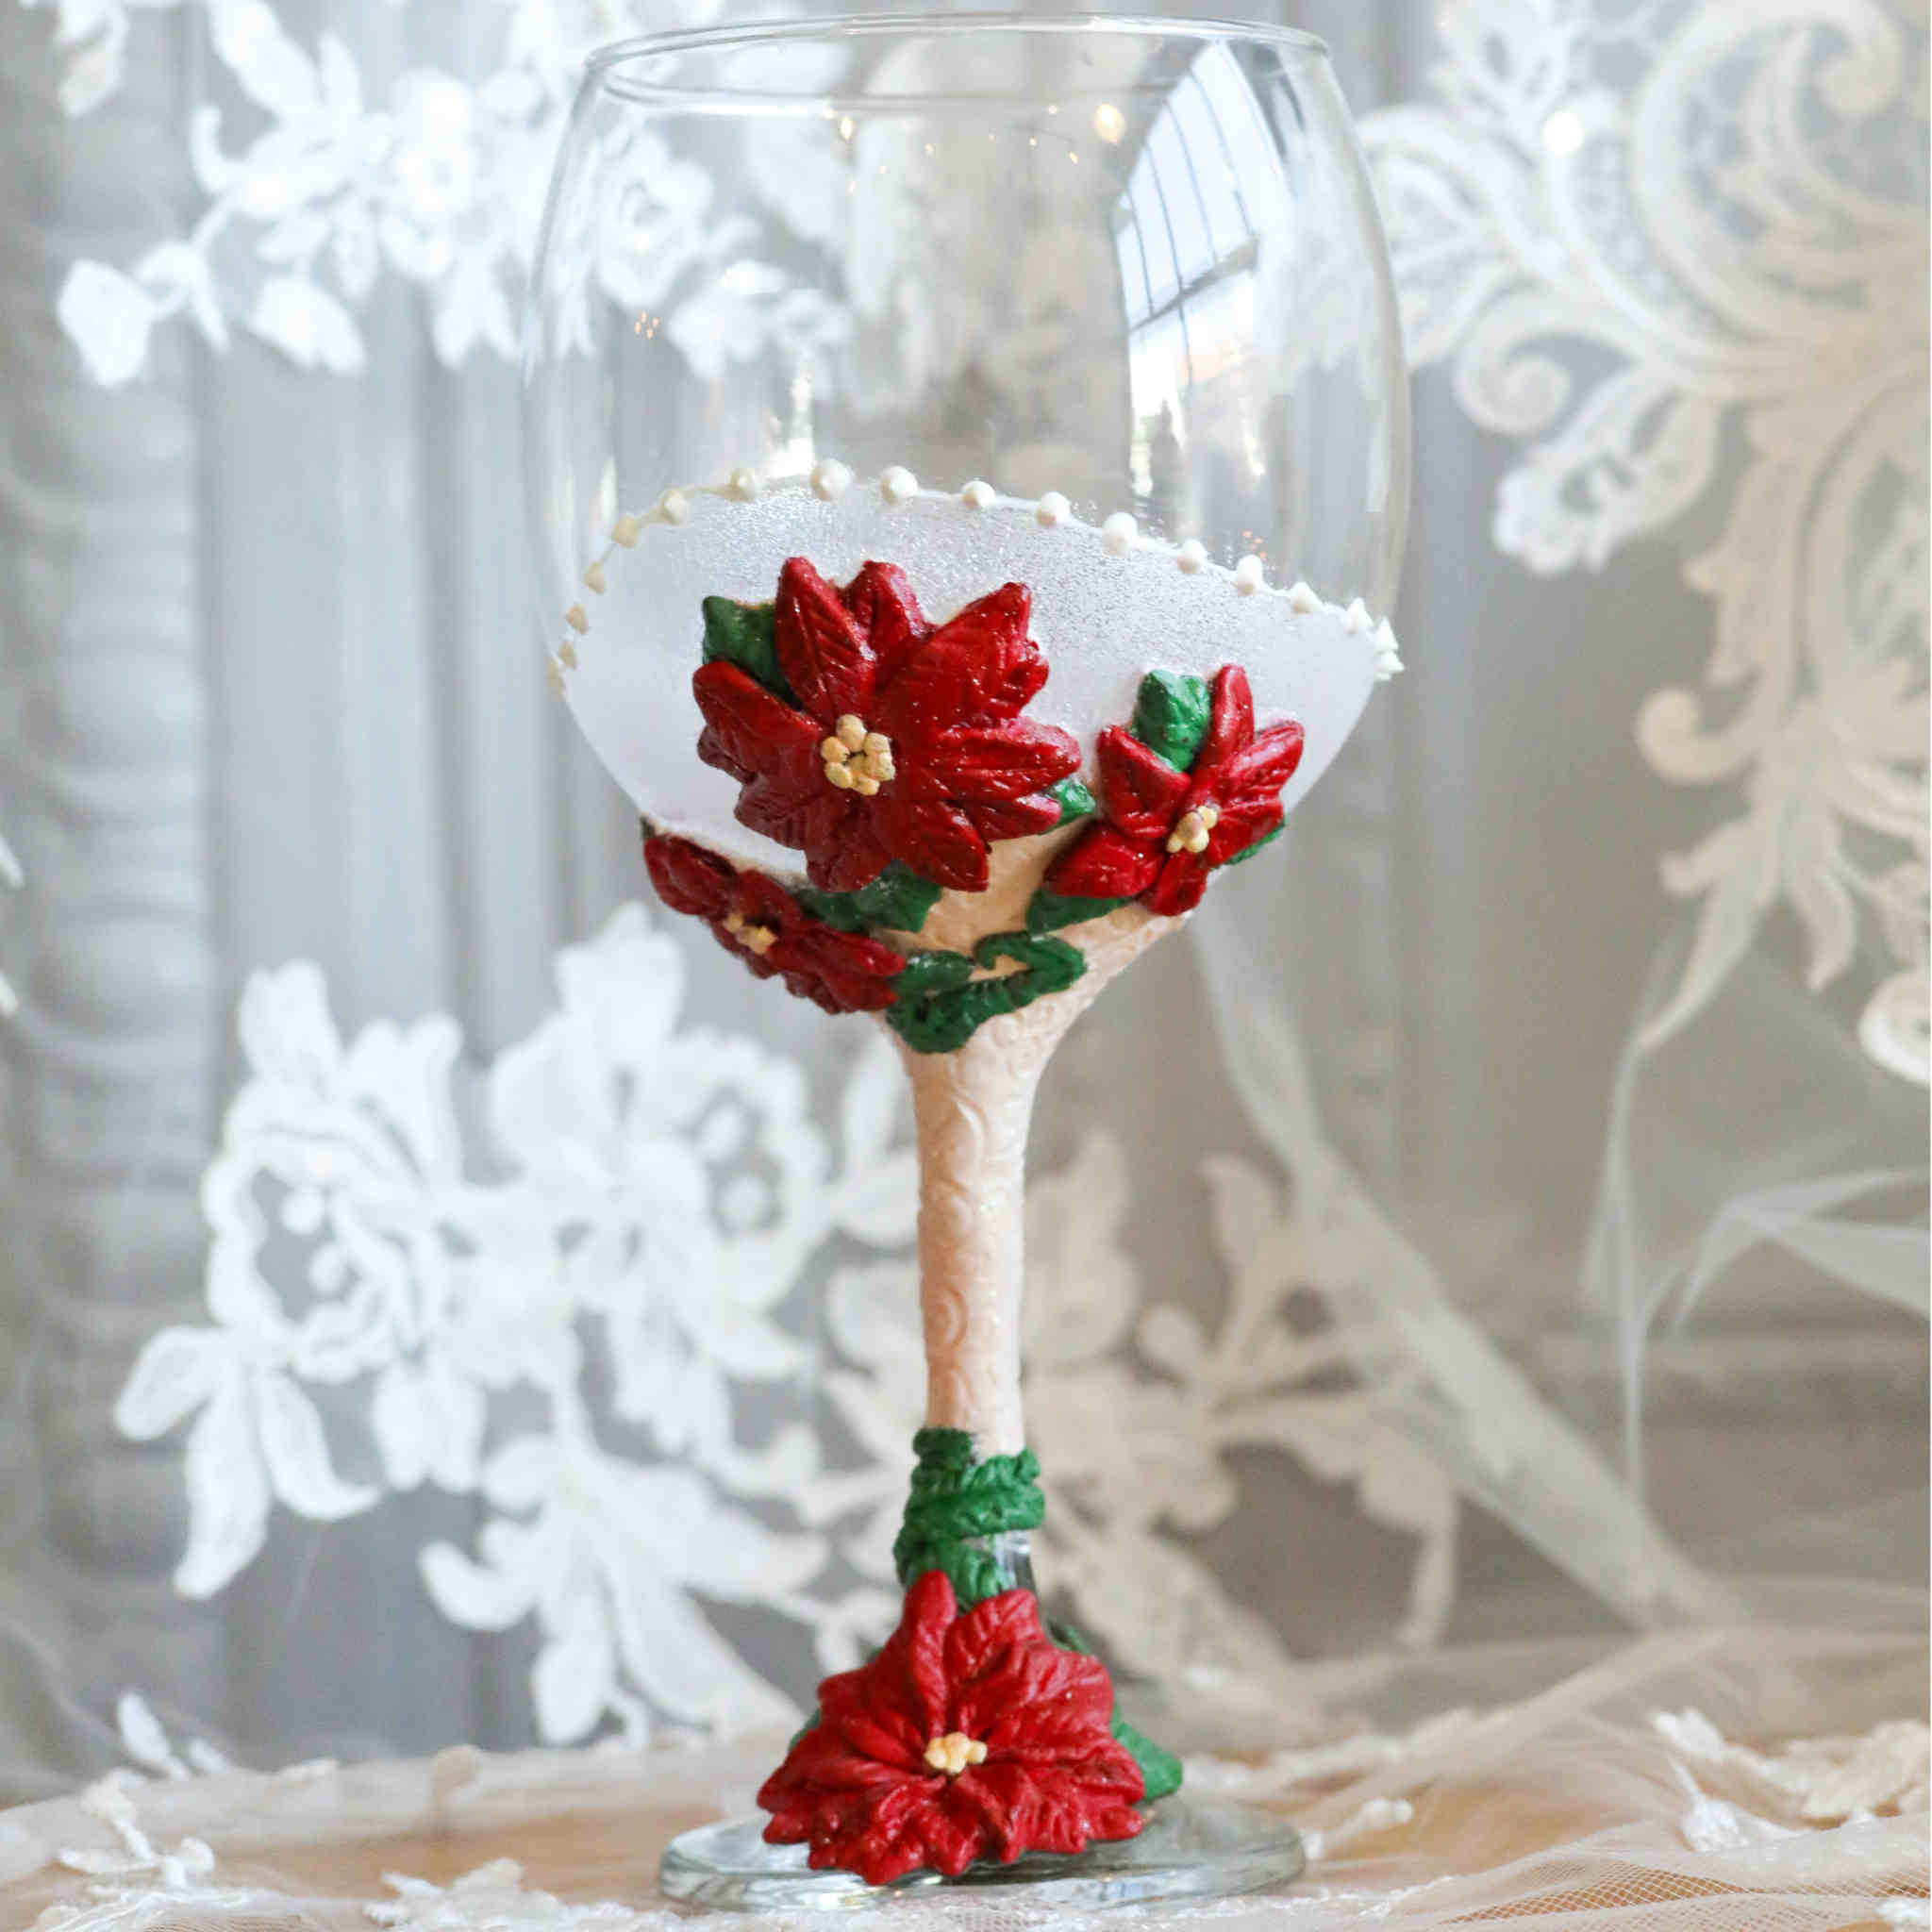 Decorated Wine Glasses Christmas